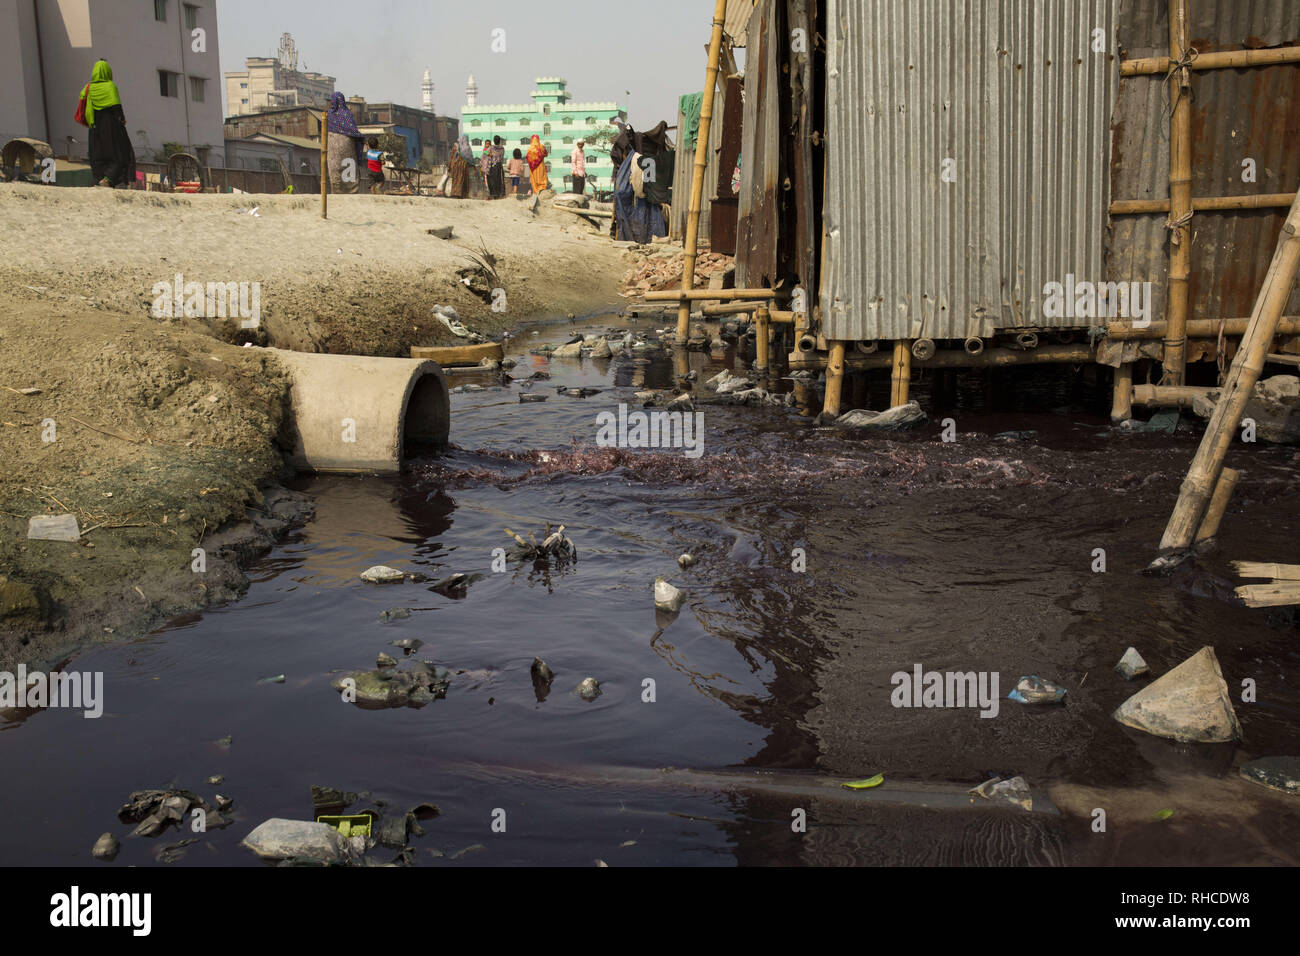 Dhaka, Bangladesh. 2nd Feb, 2019. FEBRUARY 02 : Polluted water from factories waste enter in the lake at slum area in Dhaka, Bangladesh on February 02, 2019.In recent report says, Slum dwellers at risk of diabetes and high blood pressure in Bangladesh. Credit: Zakir Hossain Chowdhury/ZUMA Wire/Alamy Live News Stock Photo